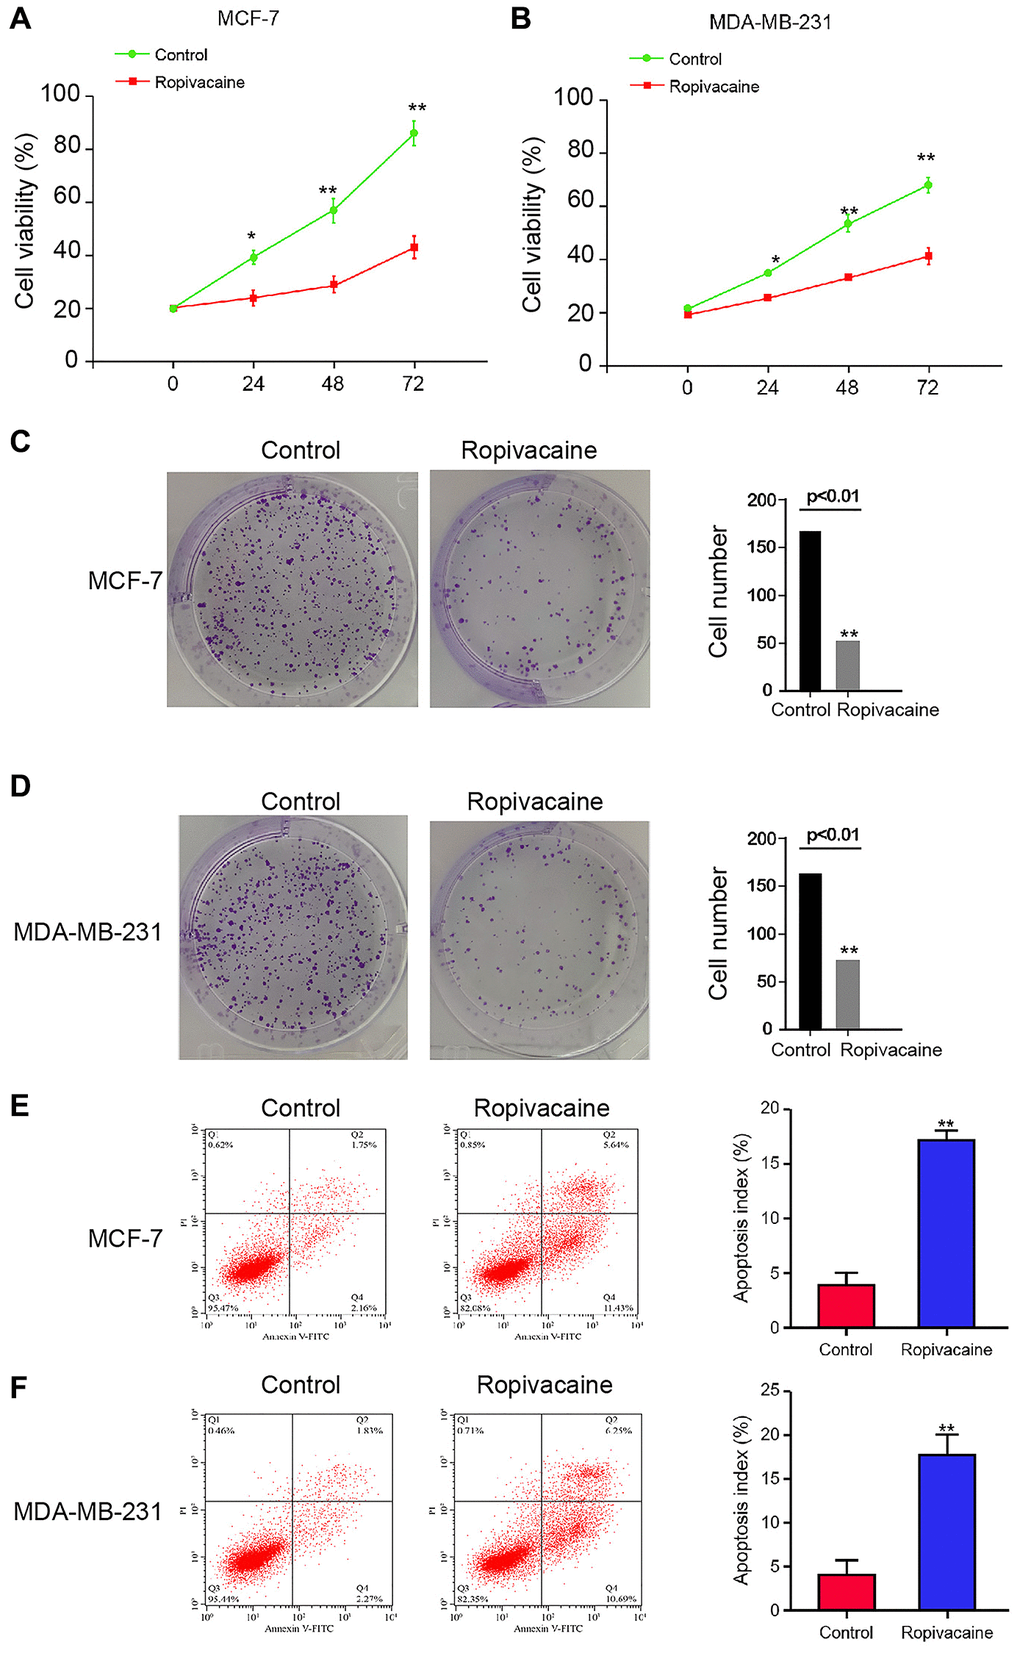 Ropivacaine inhibits proliferation and promotes apoptosis of breast cancer cells. (A–F) The MCF-7 and MDA-MB-231 cells were treated with ropivacaine (1 mmol/L) or equal volume saline. (A and B) The cell viability was analyzed by the MTT assays in the cells. (C and D) The cell proliferation was measured by the colony formation assays in the cells. (E and F) The cell apoptosis was measure by flow cytometry analysis in the cells. N = 3, The independent experiments were repeated for three times. Data are presented as mean ± SD. Statistic significant differences were indicated: *P **P 